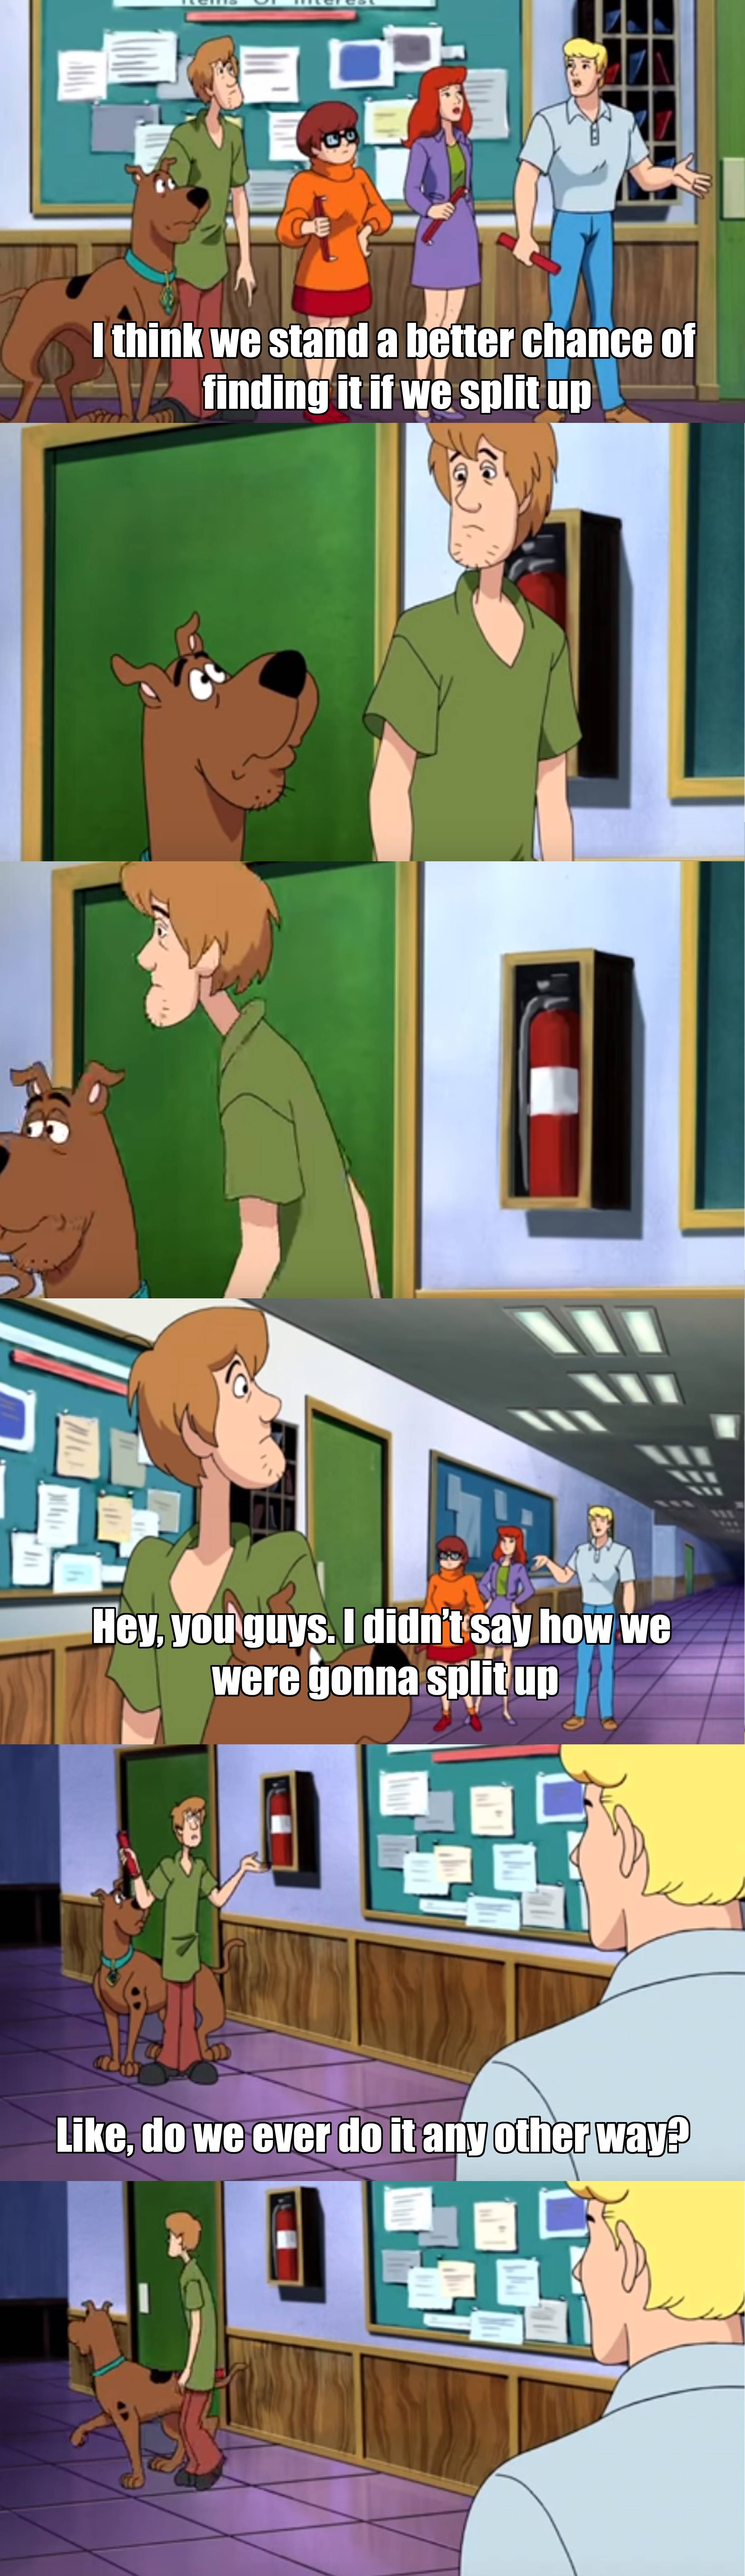 Shaggy is done with Fred's shtick at this point